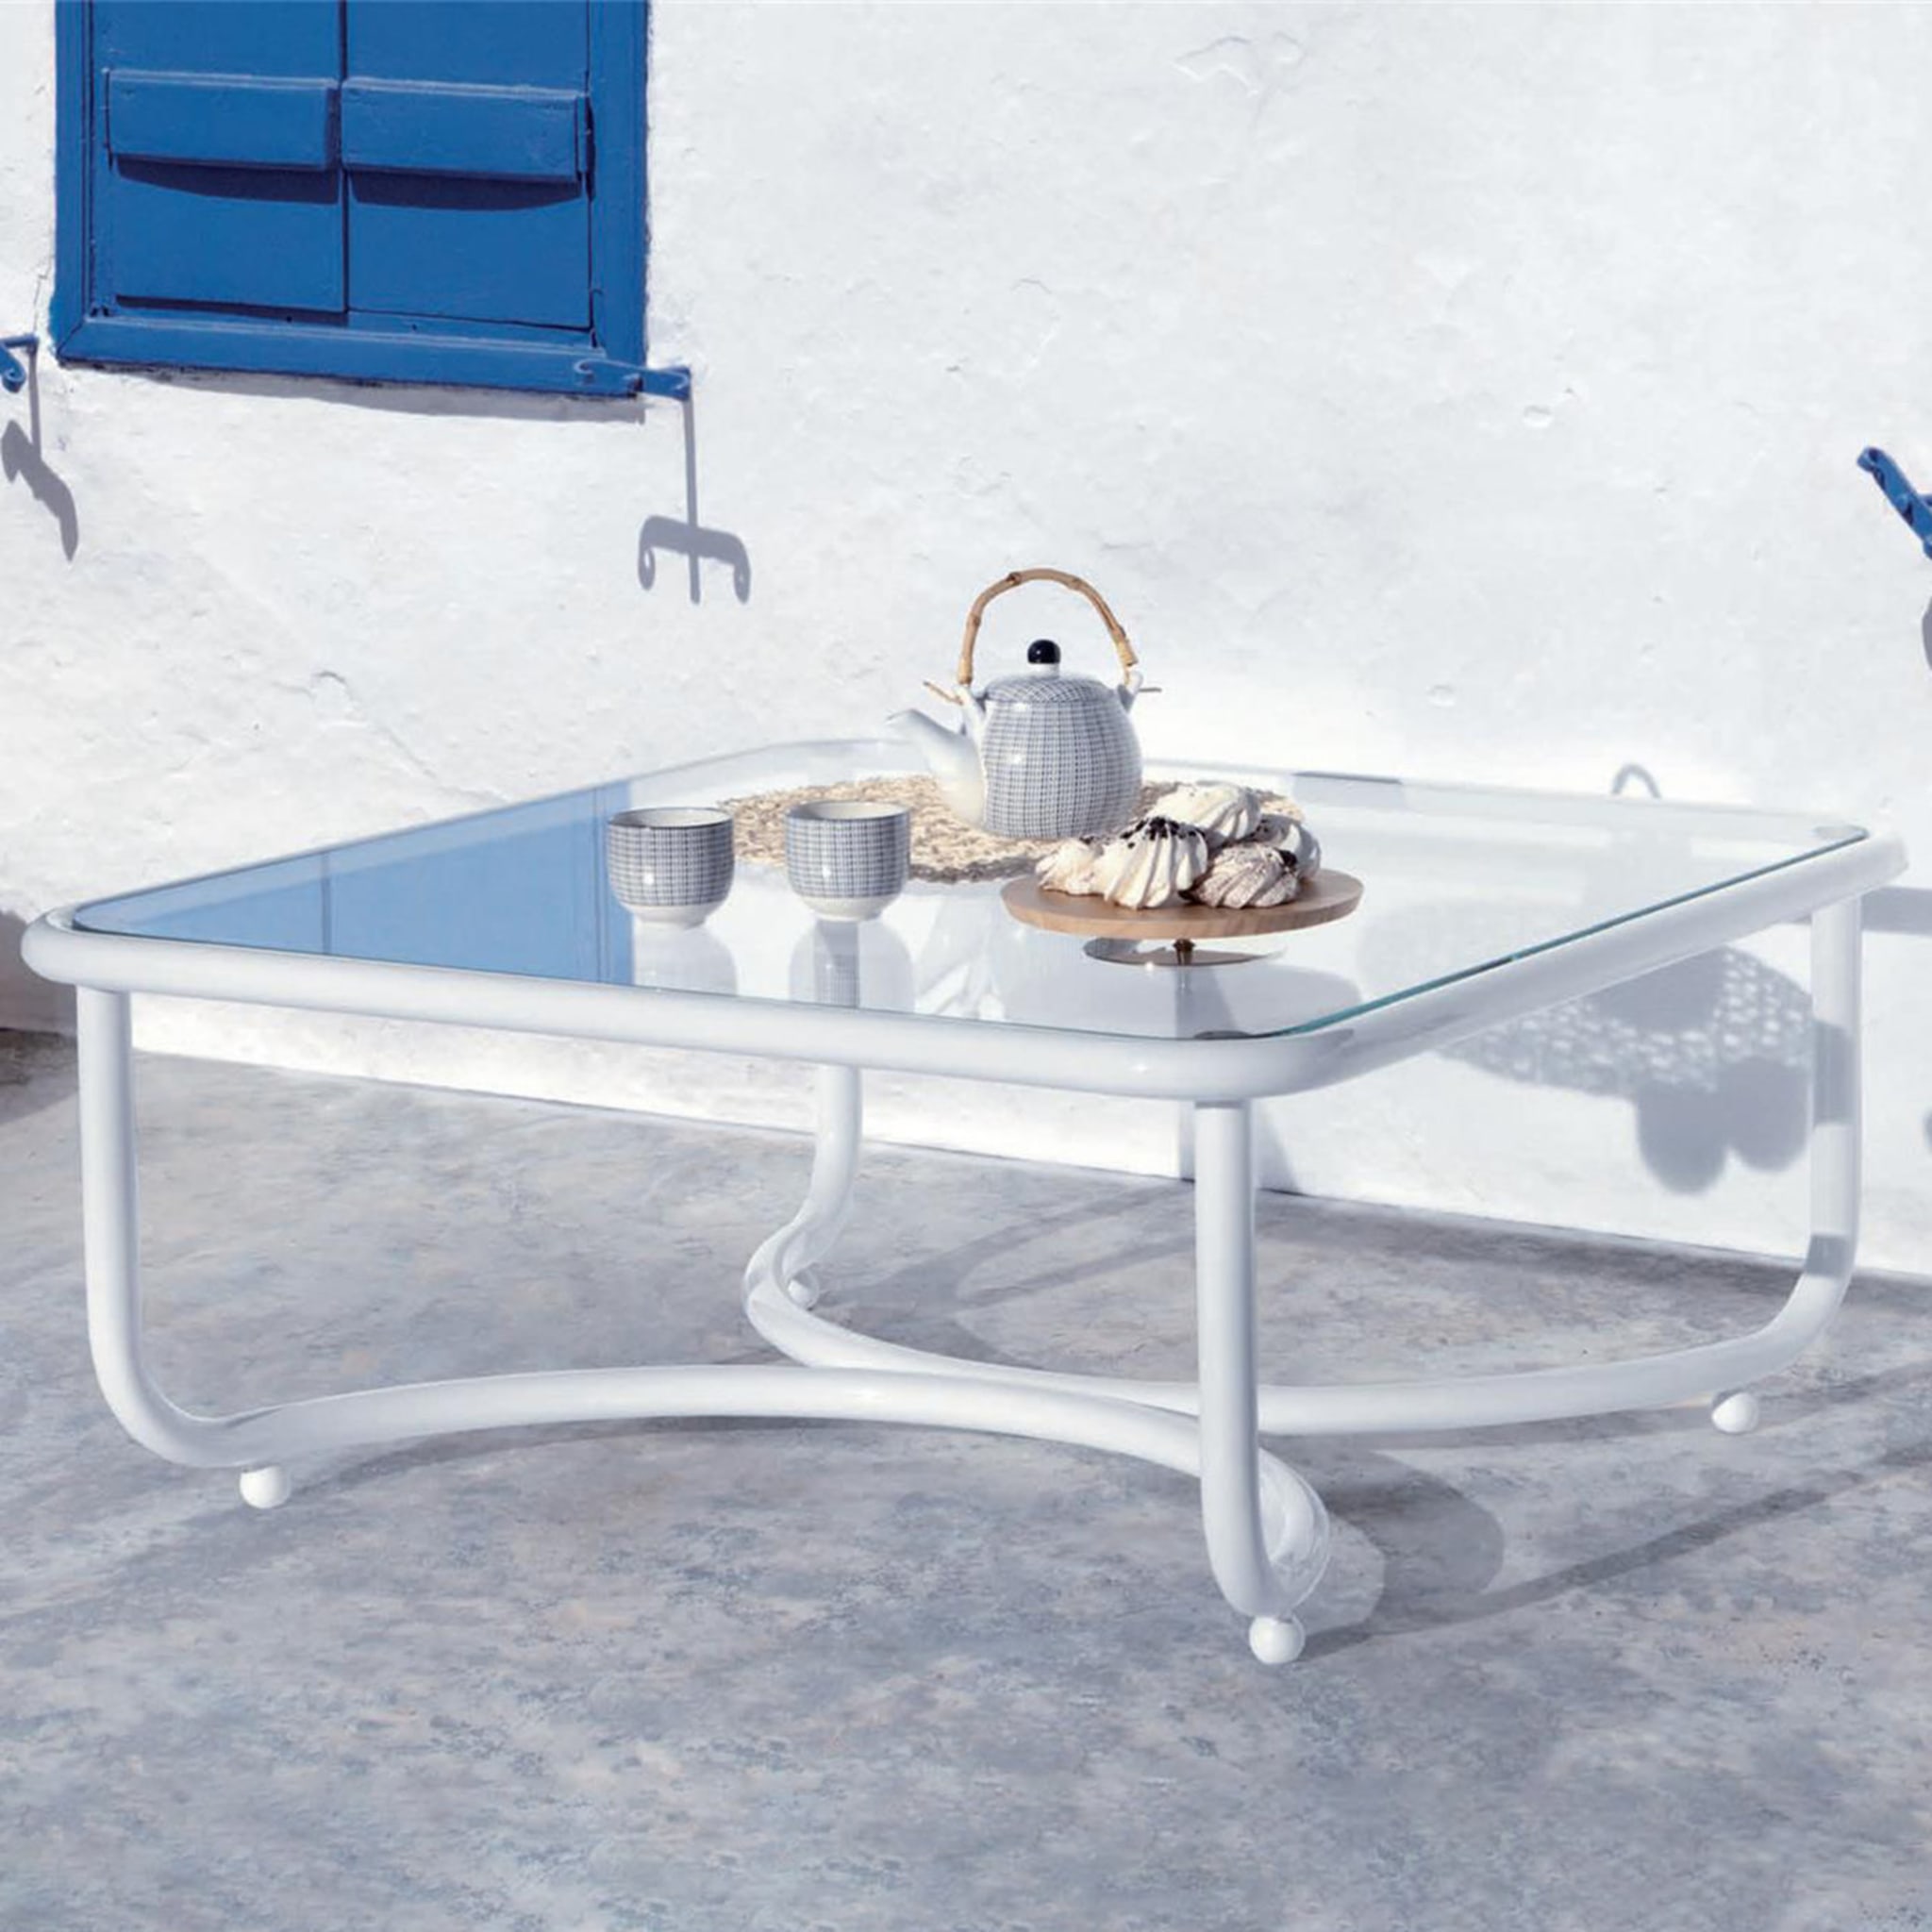 Locus Solus White Low Table by Gae Aulenti - Alternative view 2